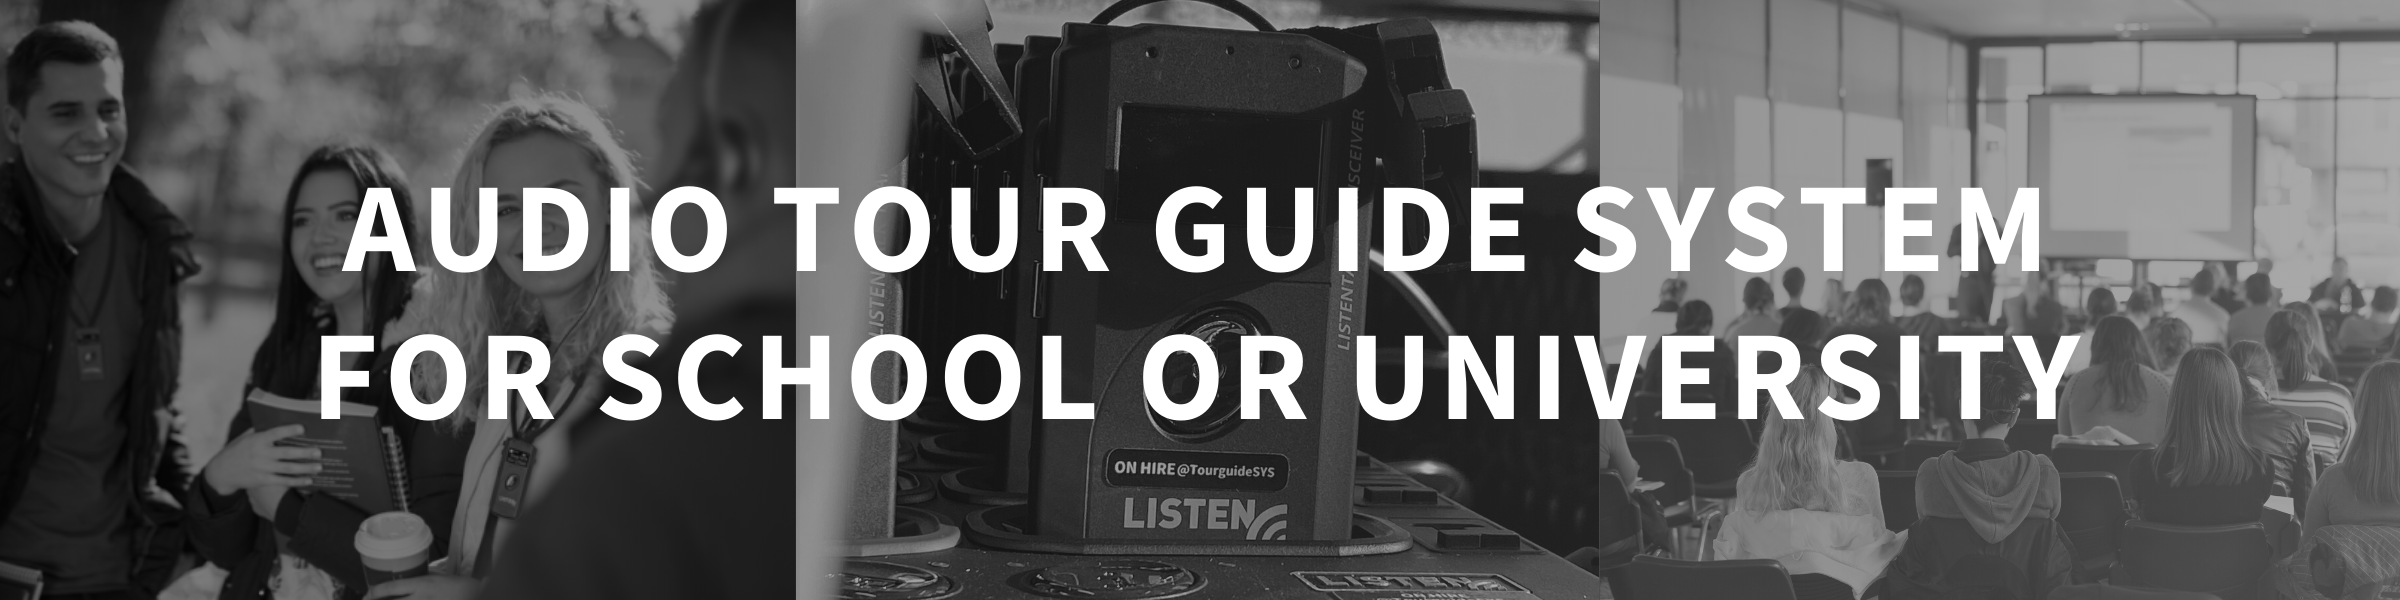 Audio Tour Guide System for School or University